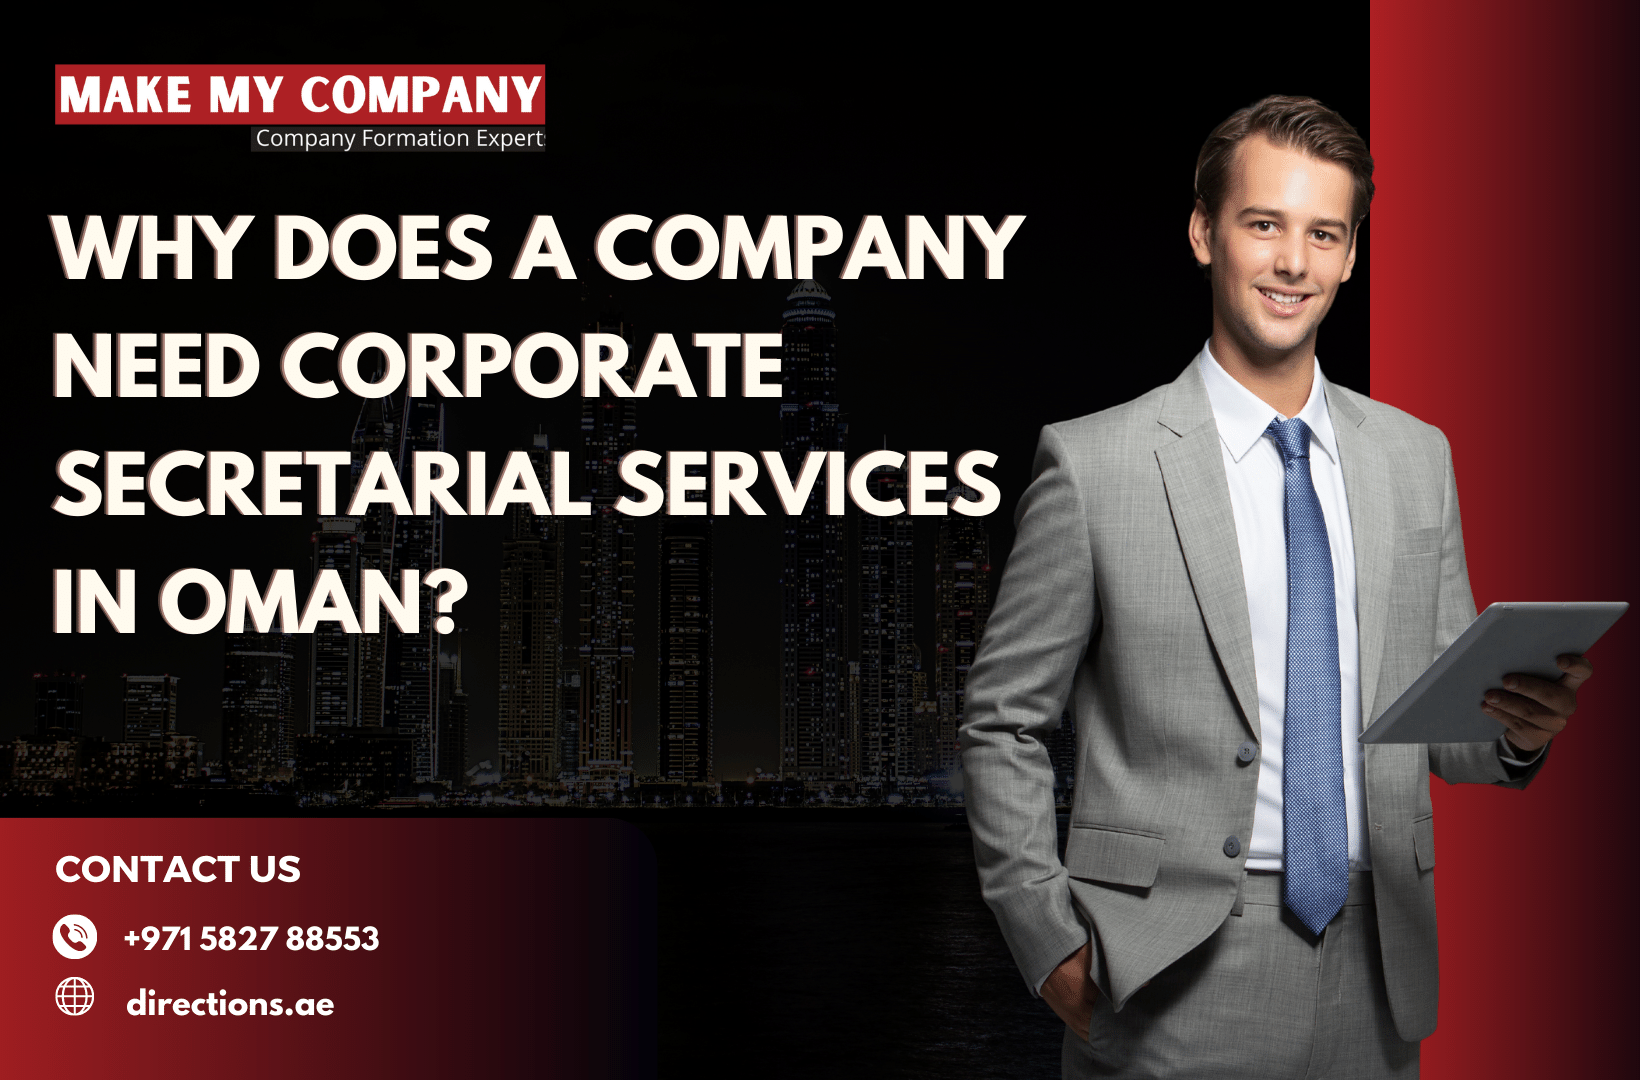 Why Does a Company Need Corporate Secretarial Services in Oman